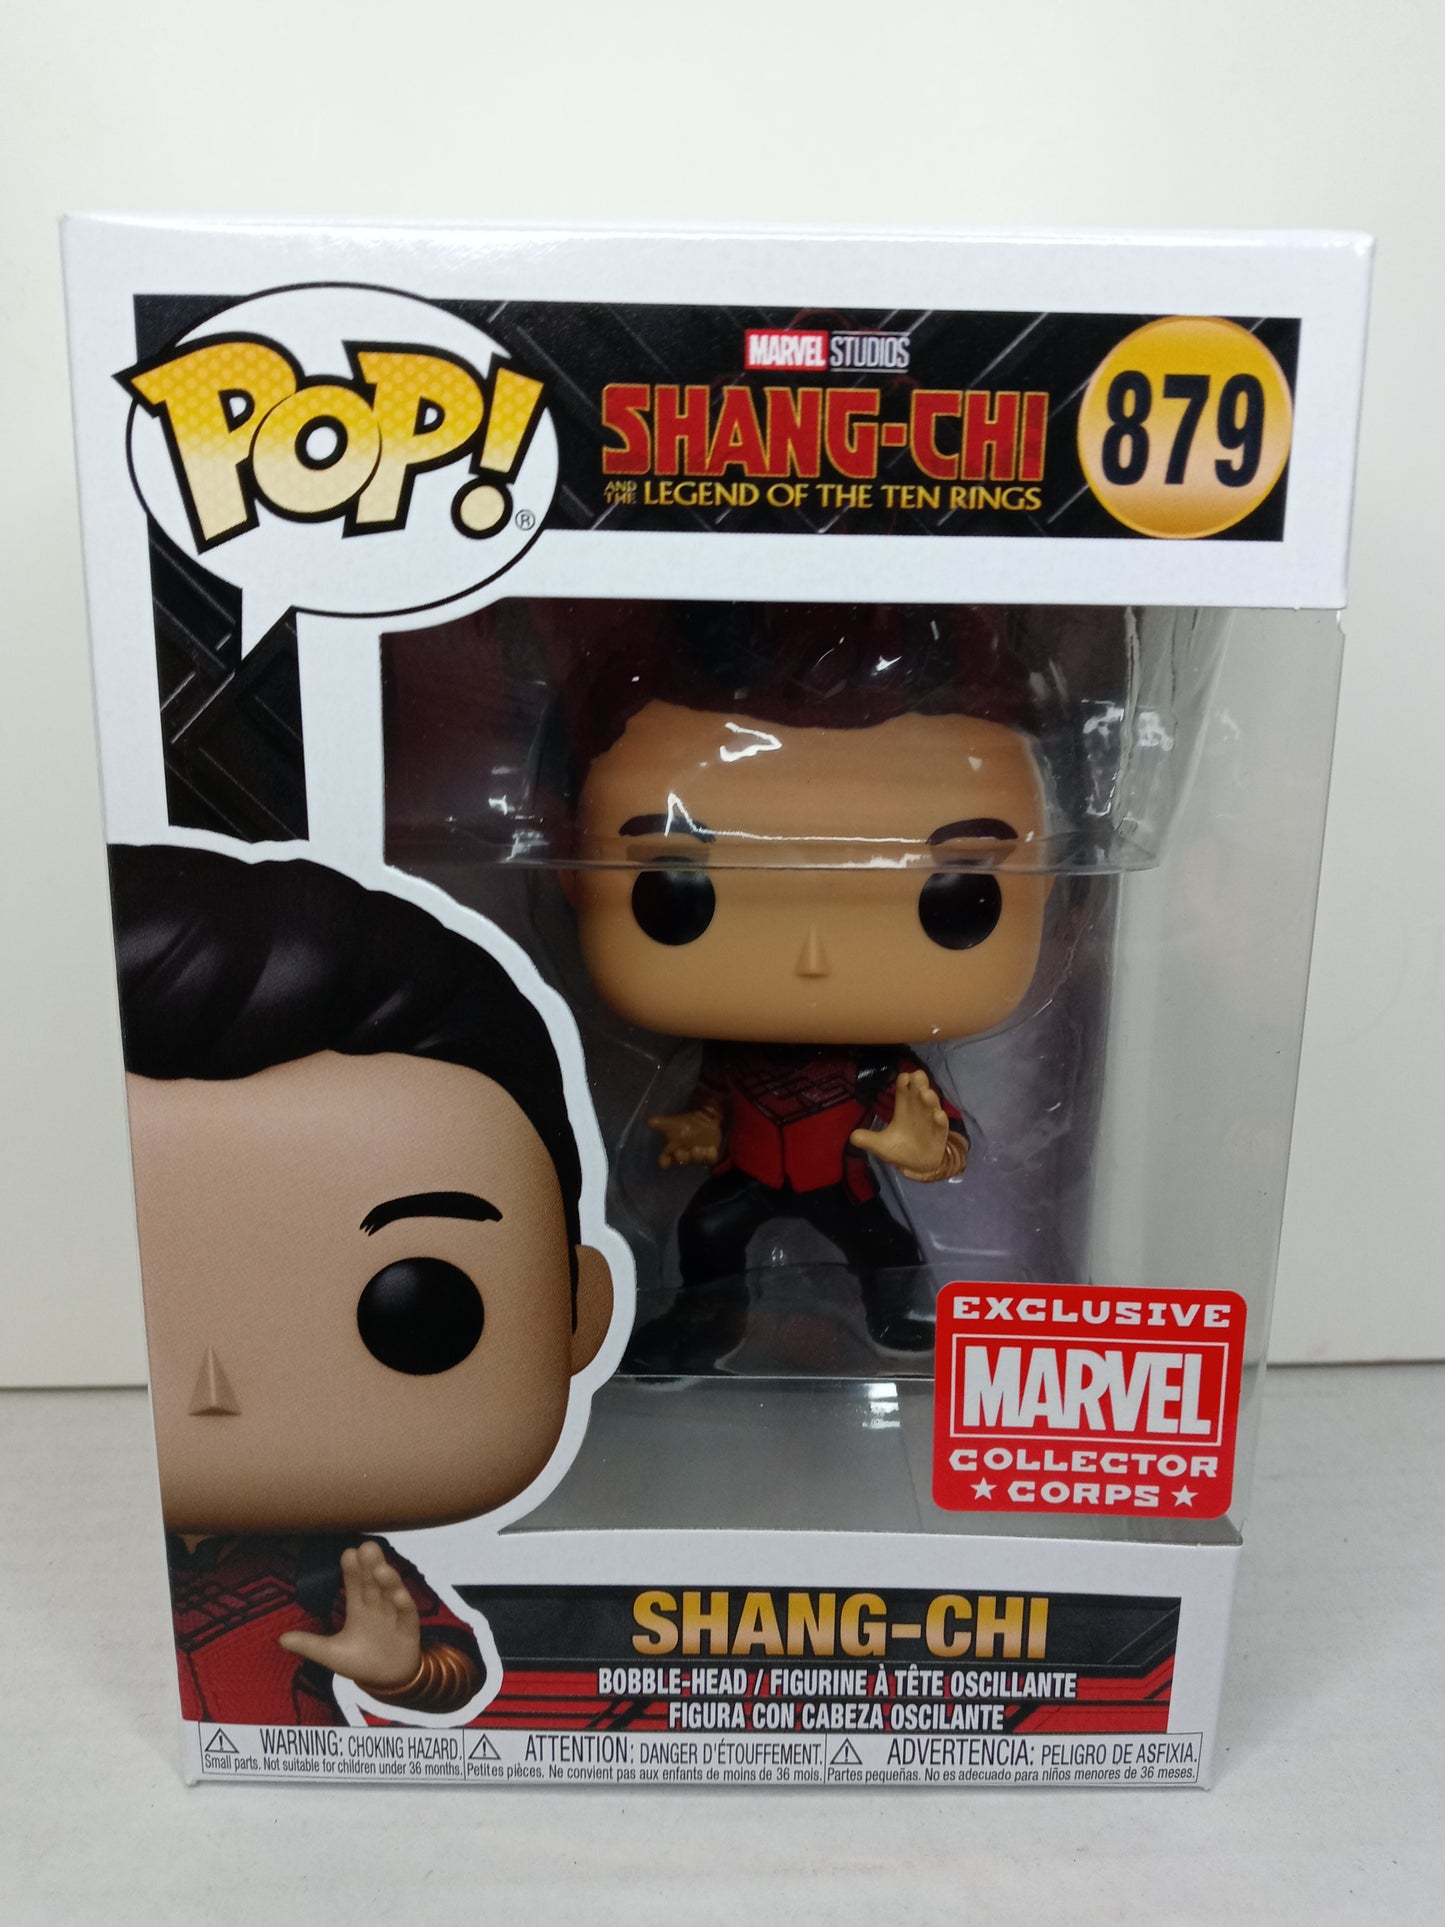 POP! Marvel 879 Shang-Chi - Shang-Chi Marvel Collector Corps Exclusive